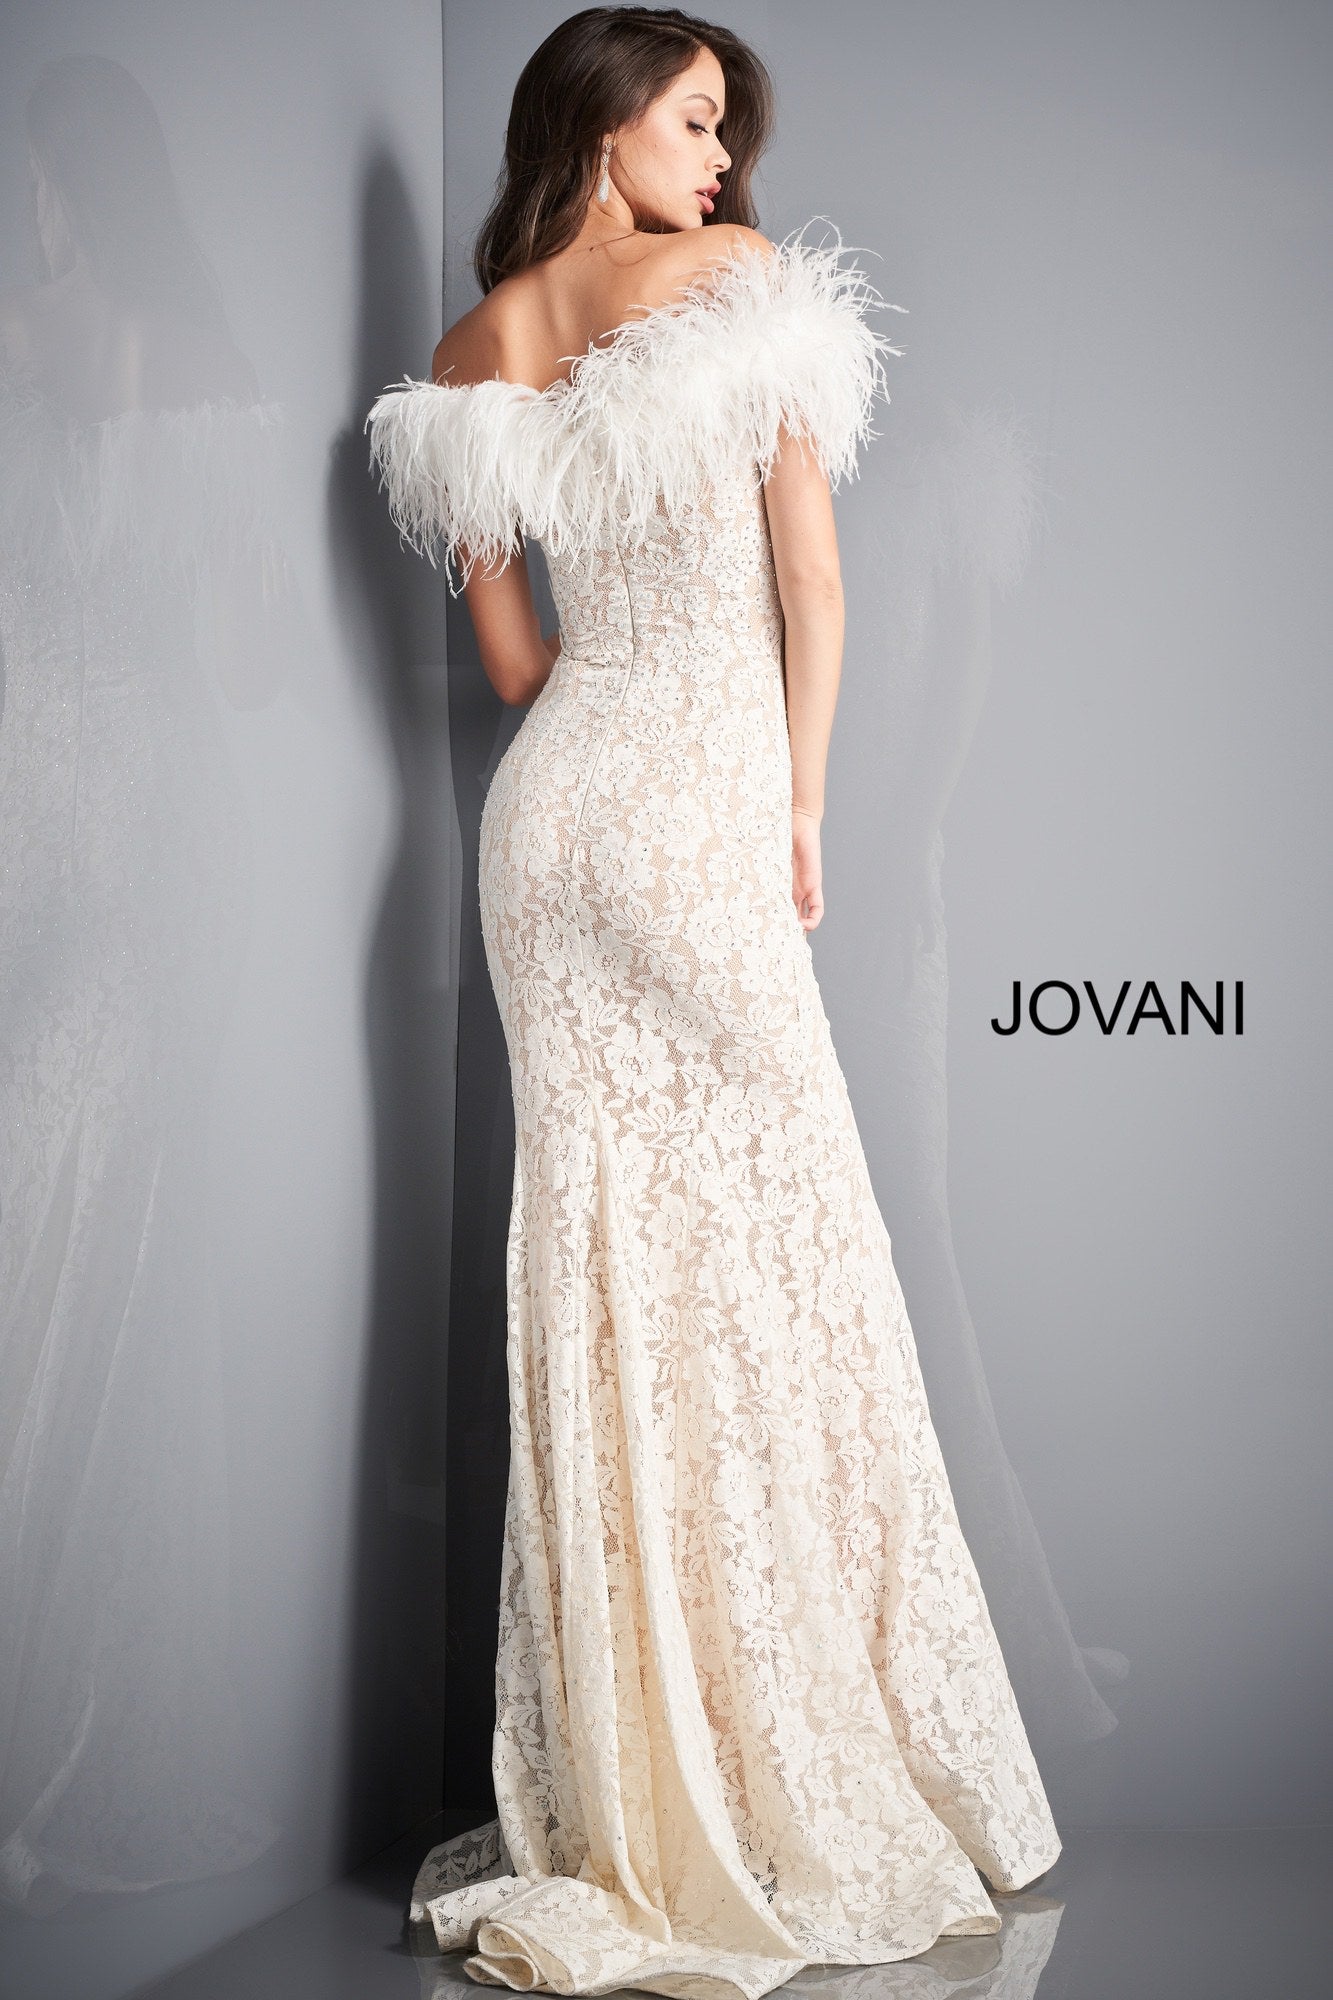 Jovani 06451 is a stunning long fitted lace formal evening gown. Lush Feather accented off the shoulder sleeves. Fit & Flare silhouette with a lush sweeping train with horse hair trim. Fully embellished with scattered crystal rhinestones. sweeping train. Wedding reception dress. prom dress. pageant gown. Available Sizes: 00,0,2,4,6,8,10,12,14,16,18,20,22,24  Available Colors: BLACK, EMERALD, IVORY, LIGHT-BLUE, NAVY, RED